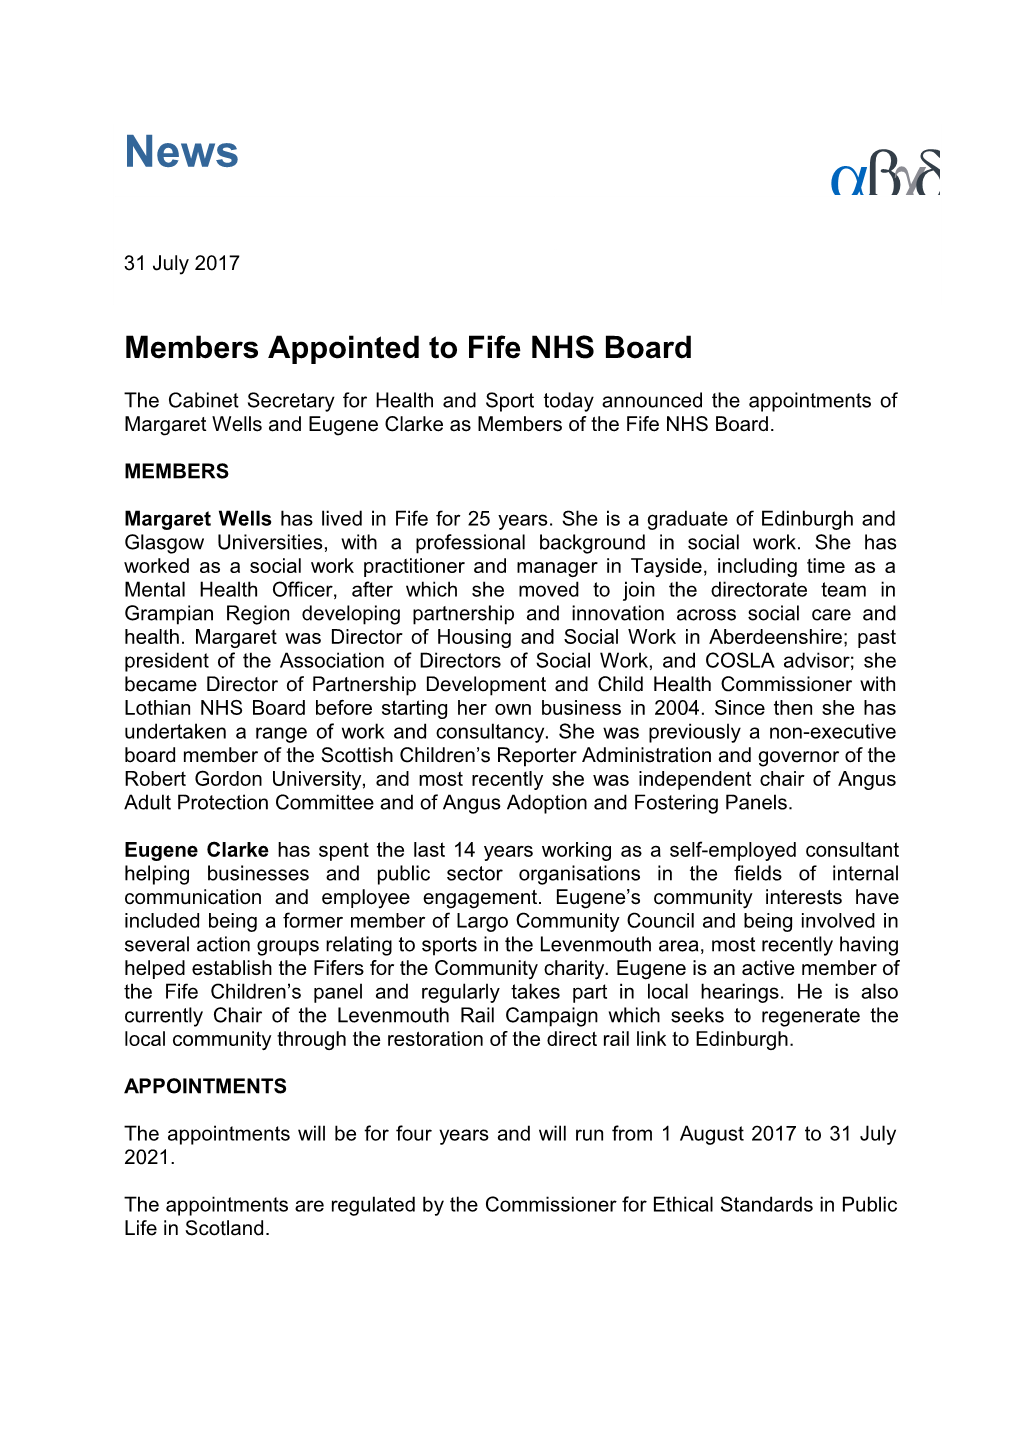 Membersappointed to Fife NHS Board